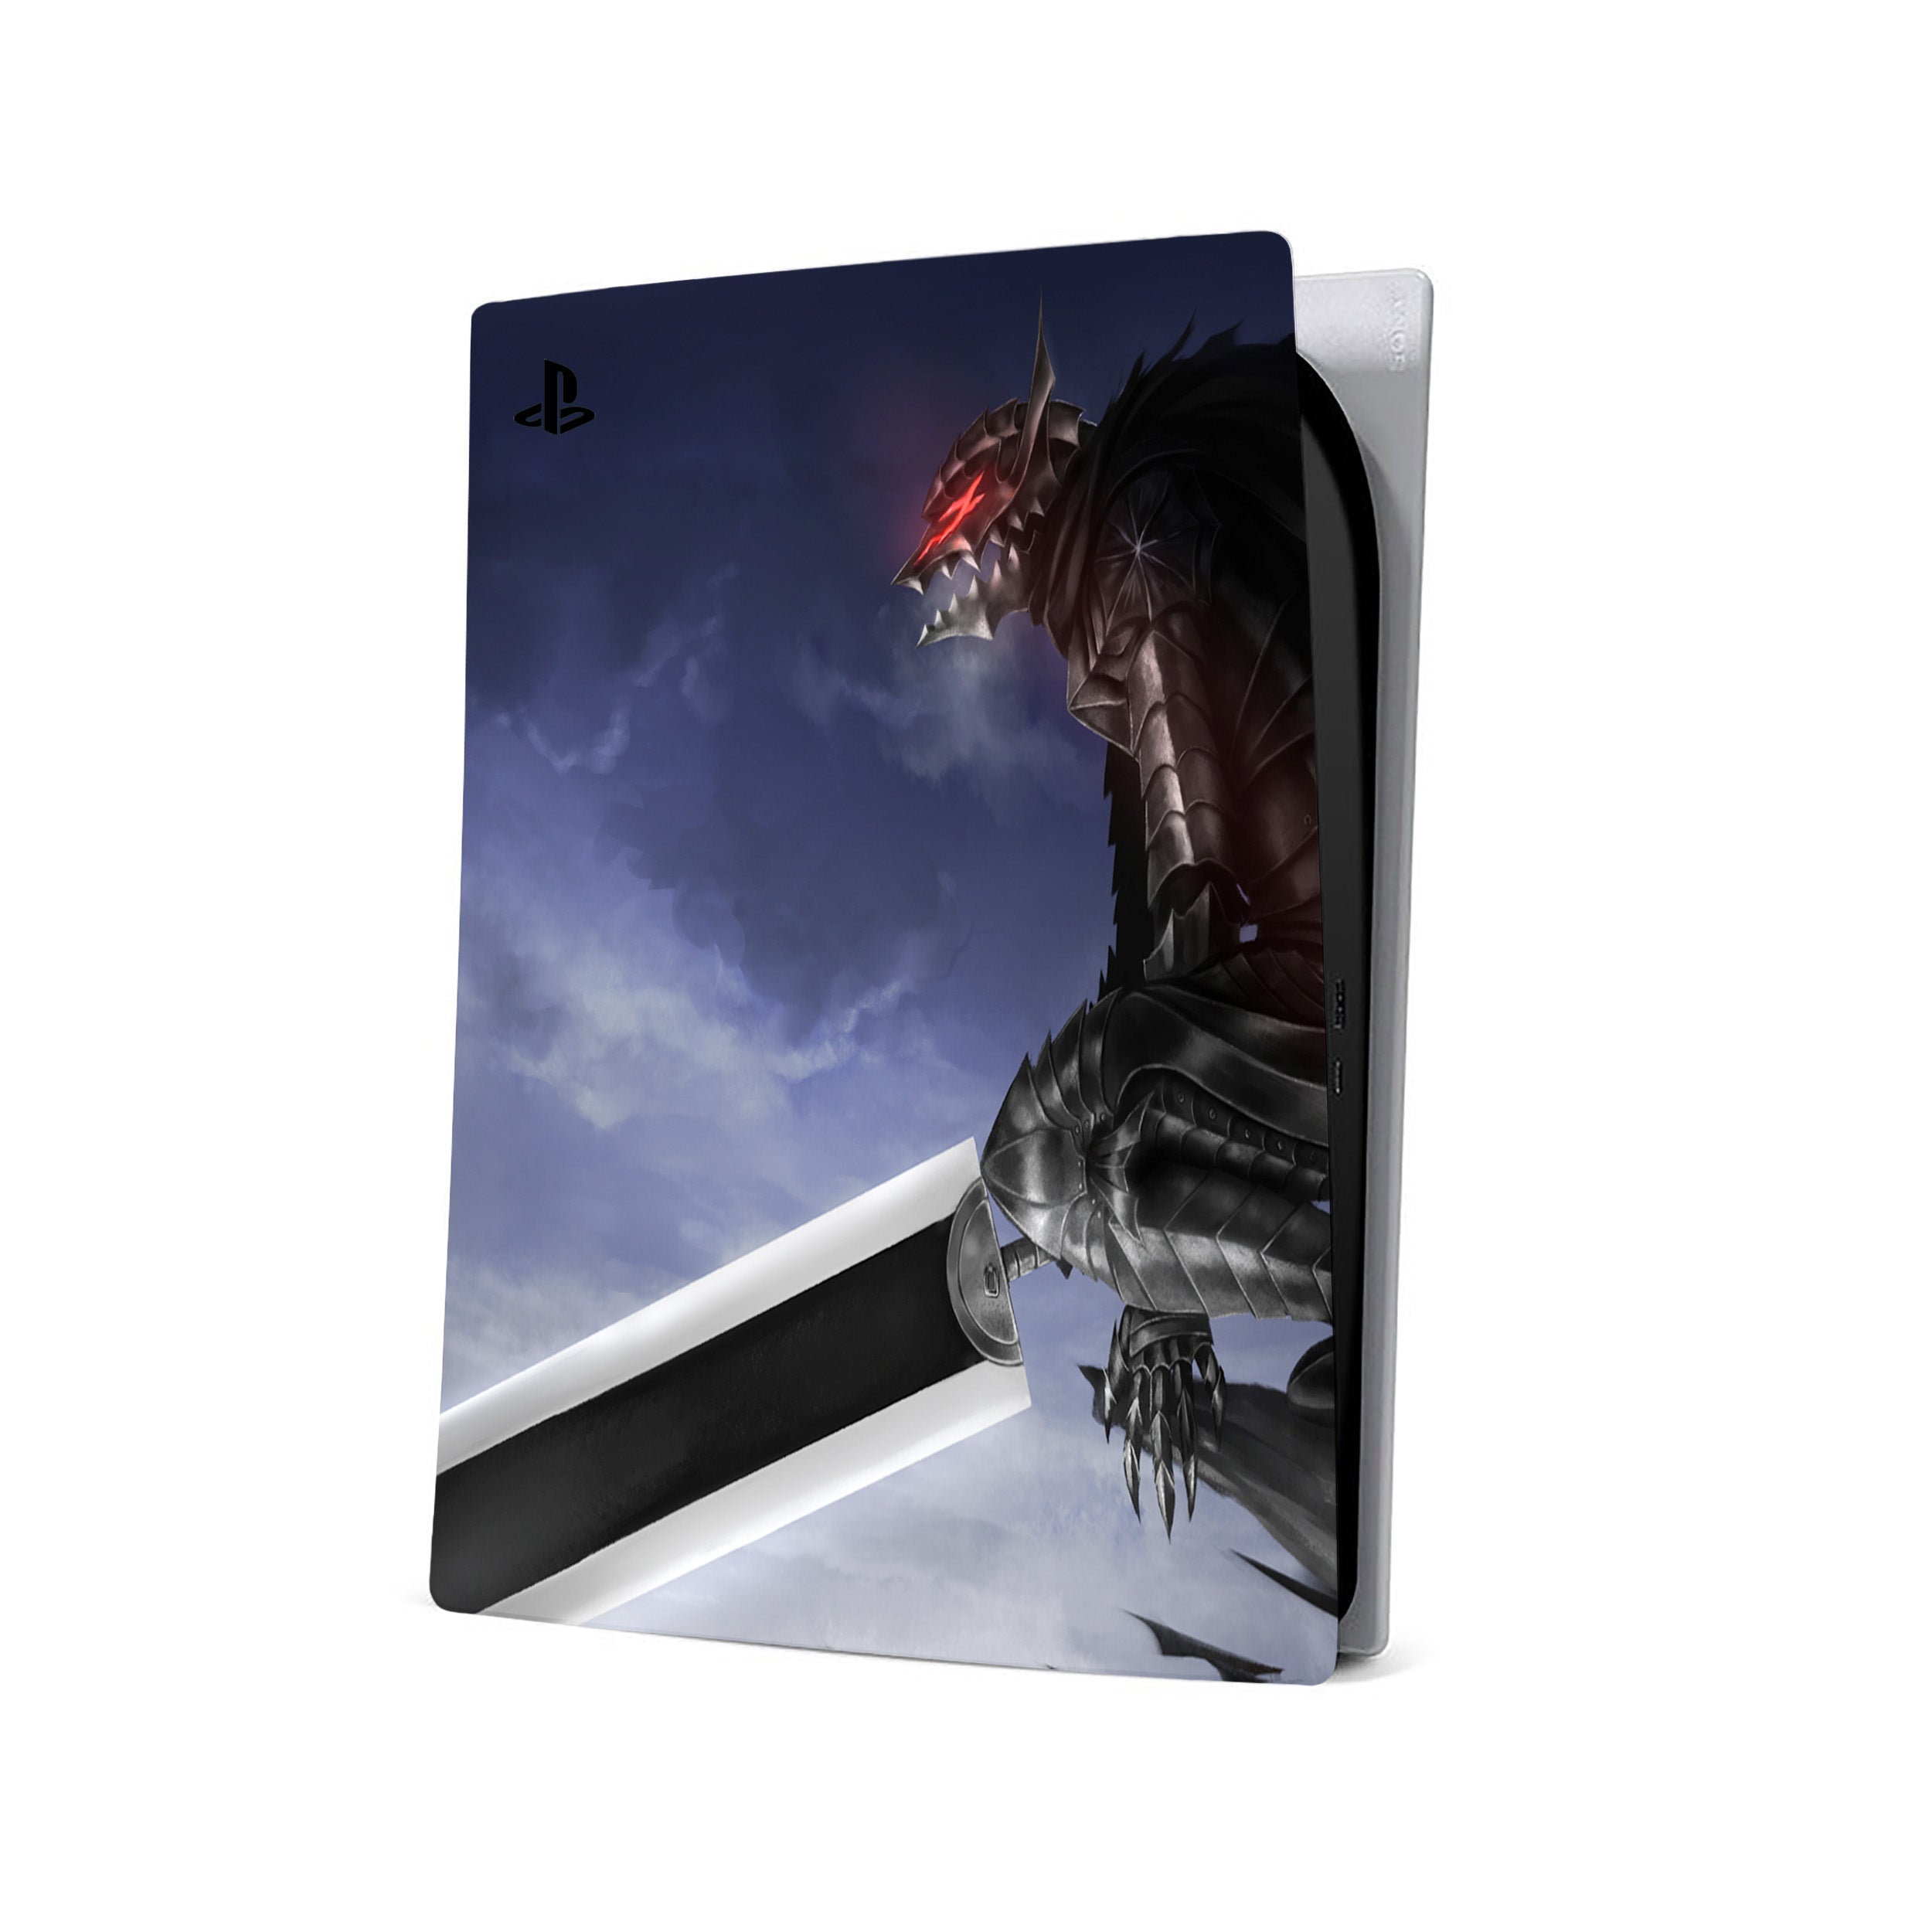 A video game skin featuring a Berserk Guts design for the PS5.